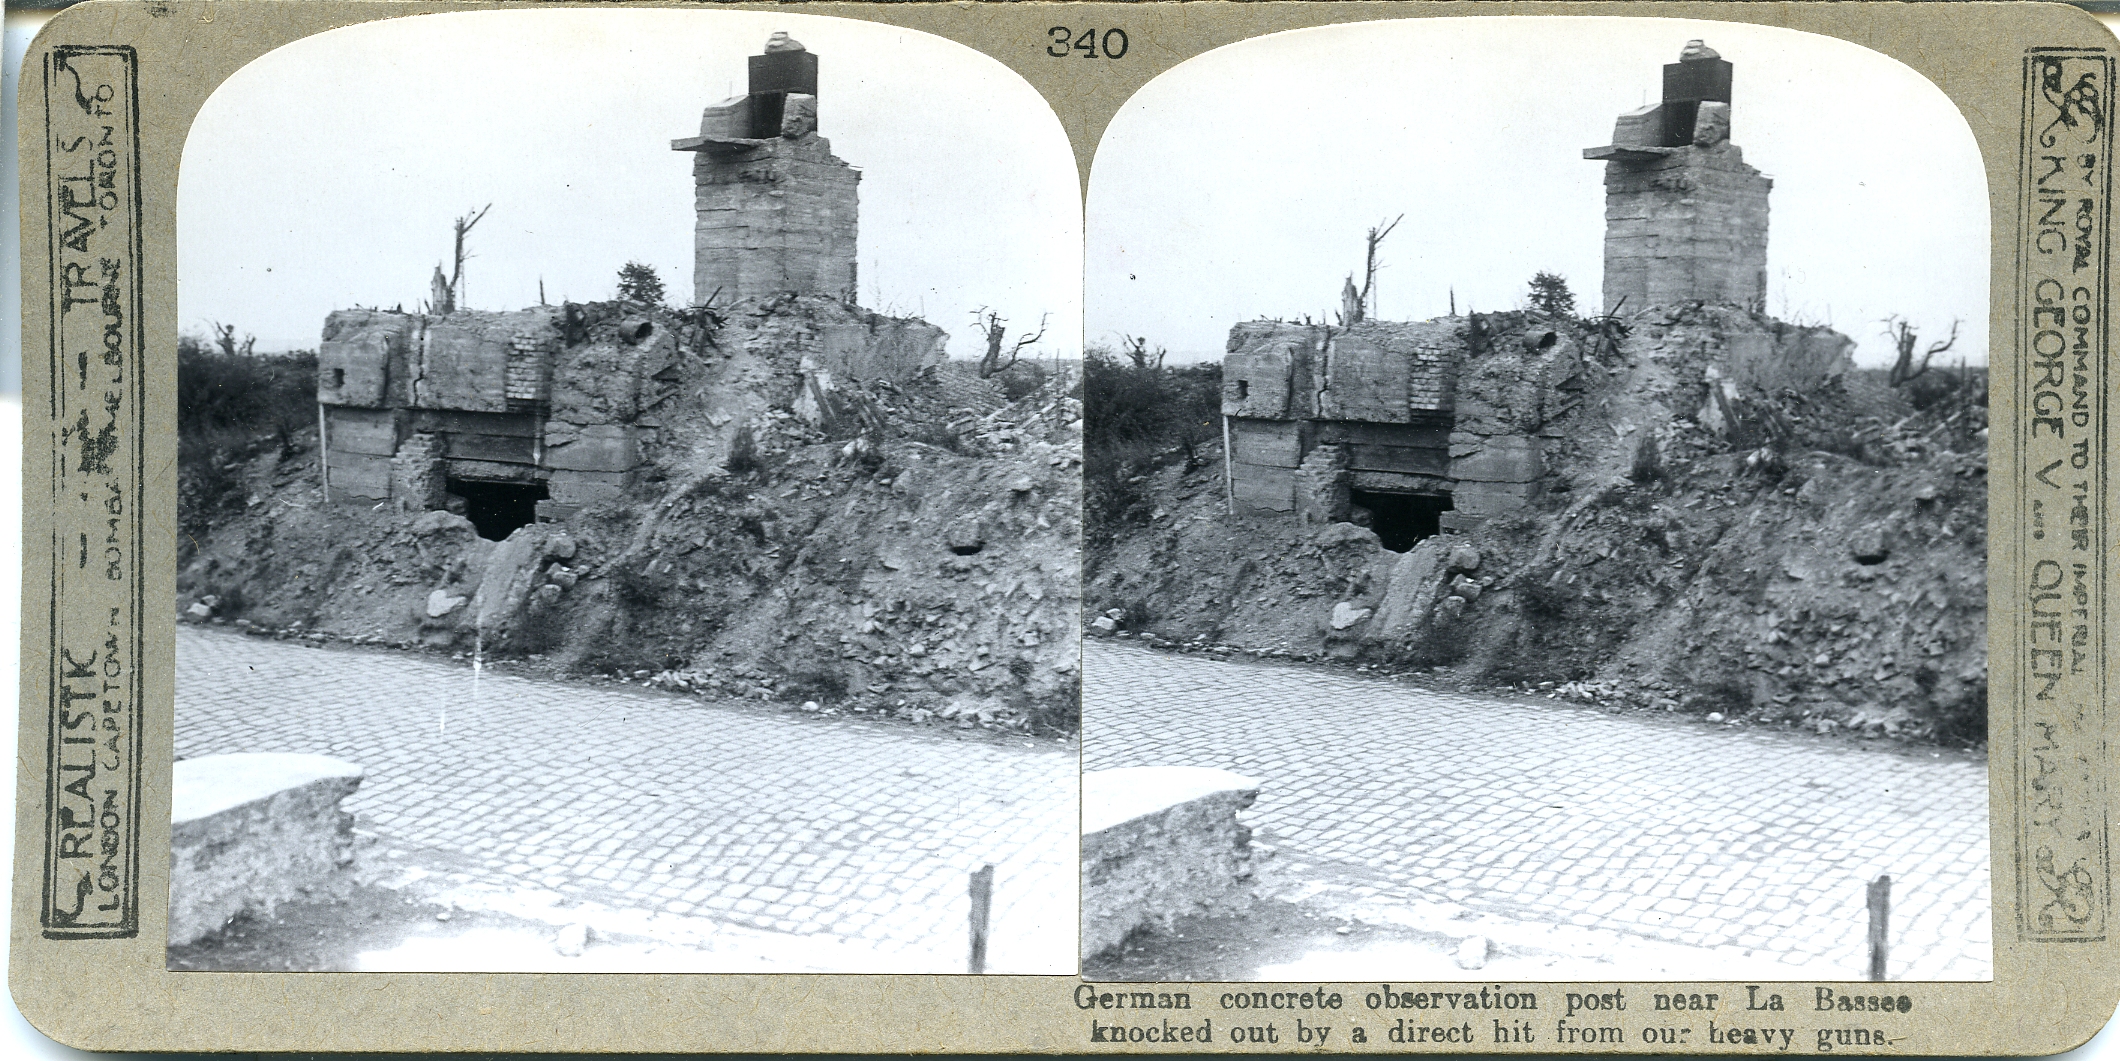 German concrete observation post near La Bassee knocked out by a direct hit from our heavy guns